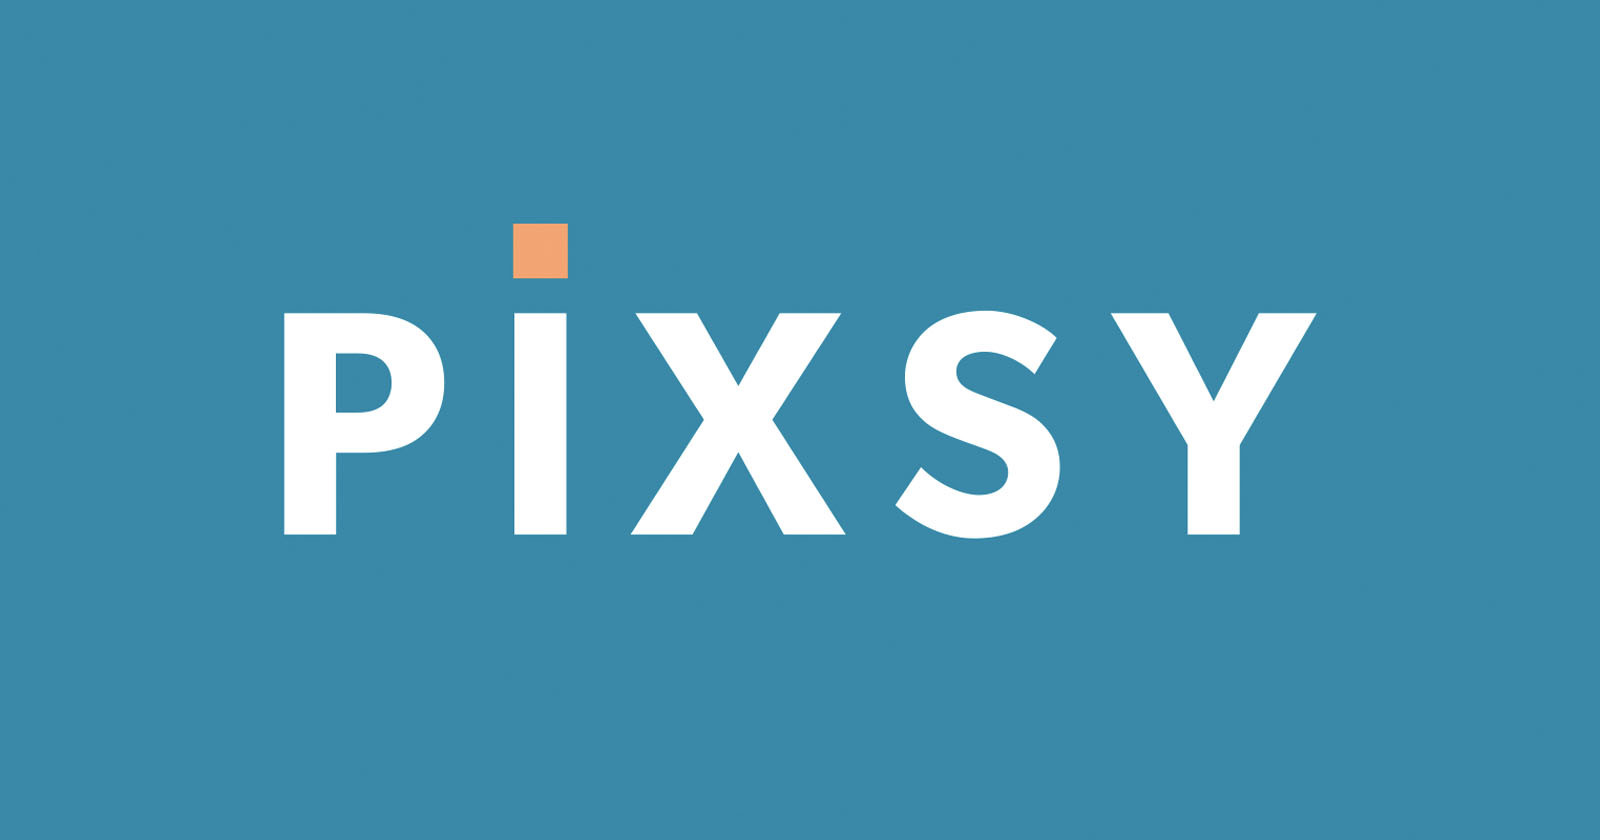 Pixsy Suffers IT Issue But Says Data Wasnt Compromised